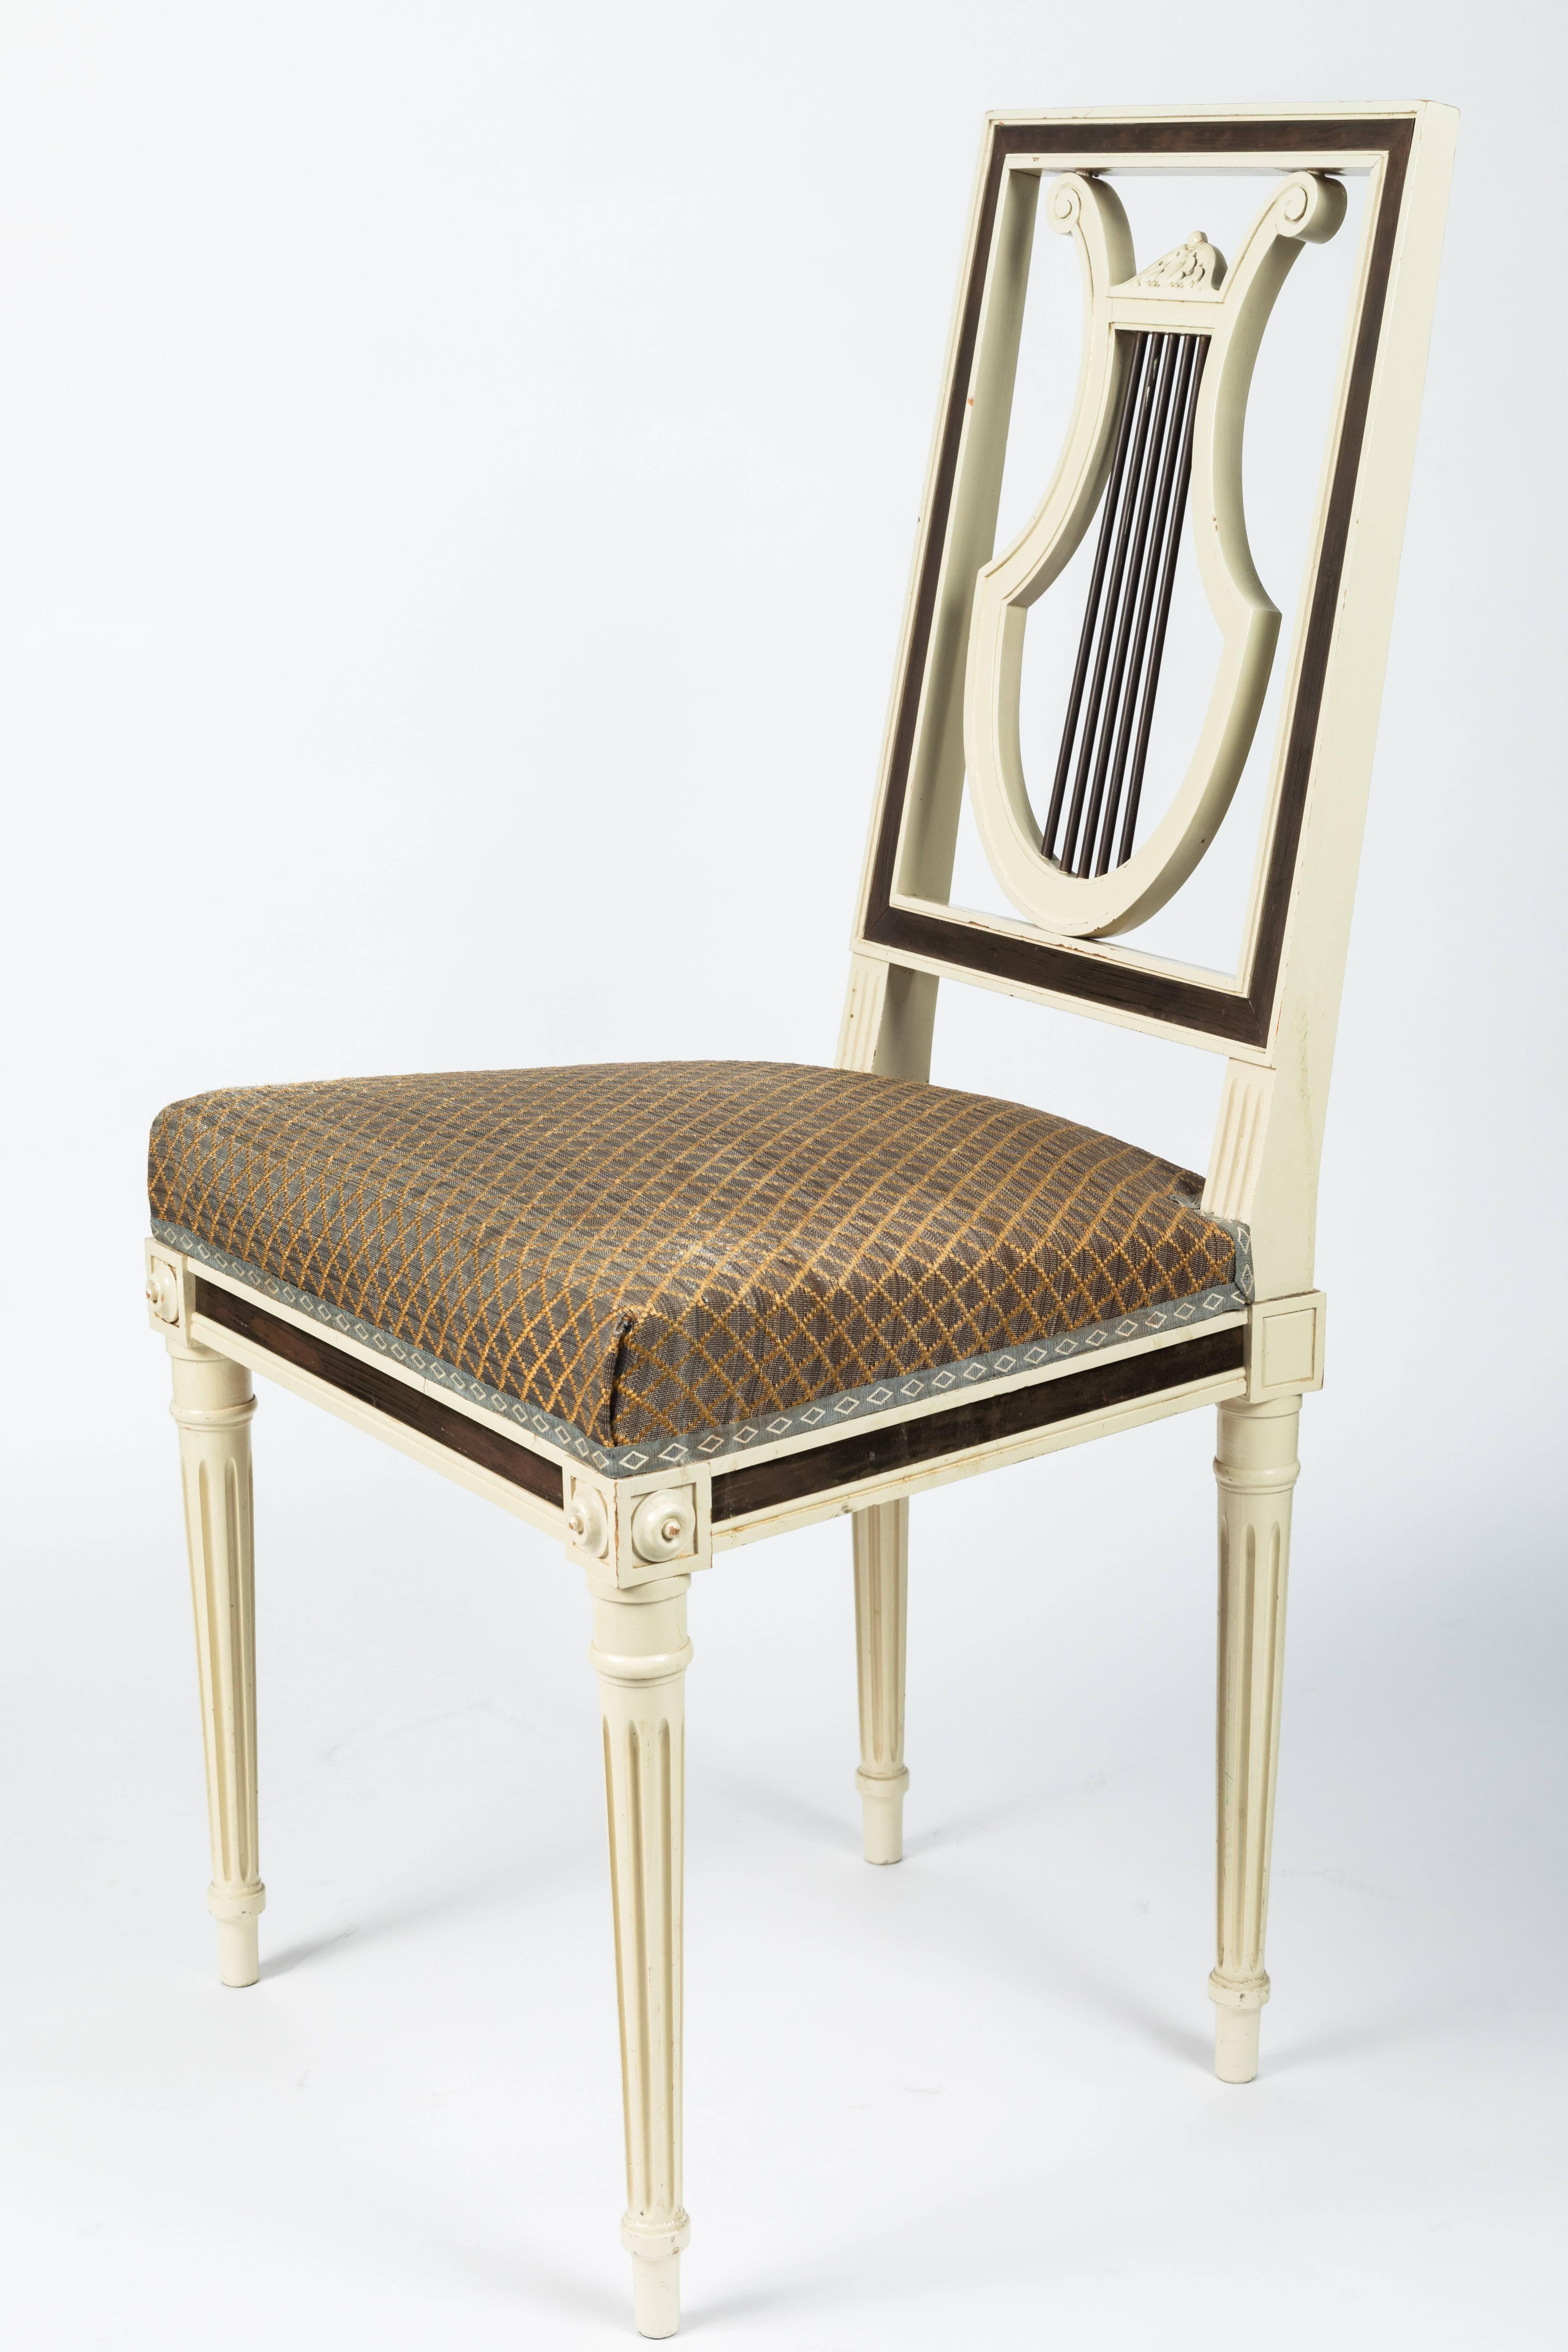 Set of four Louis XVI style lyre back dining chairs, created in the 1960s by Maison Jansen. Cream lacquer with brass inlay. Re-upholstered in Clarence House horsehair.